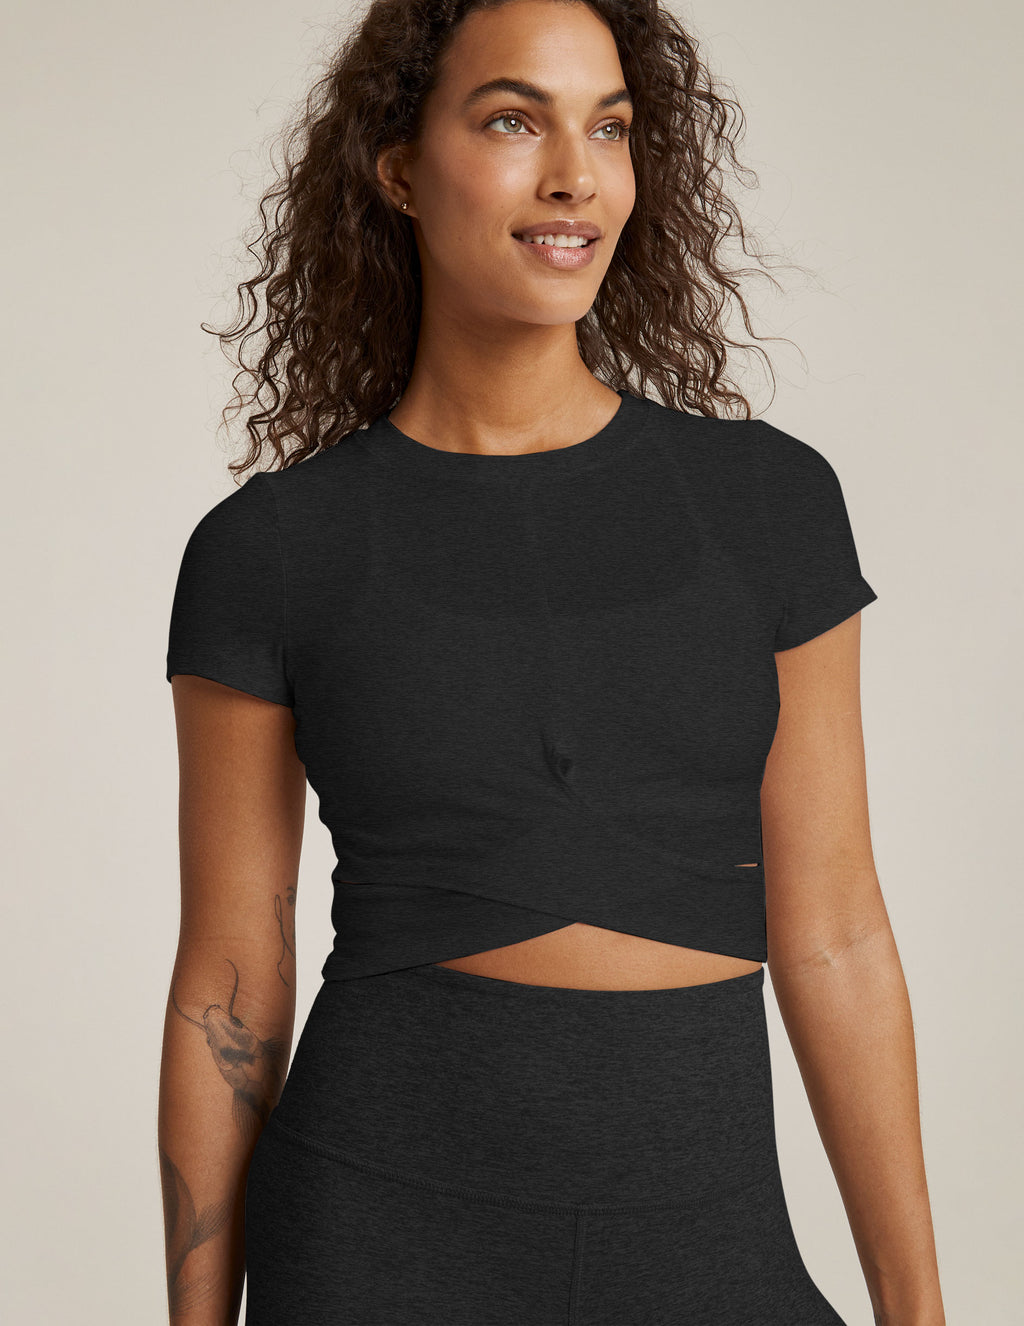 Featherweight Under Over Cropped Tee Featured Image